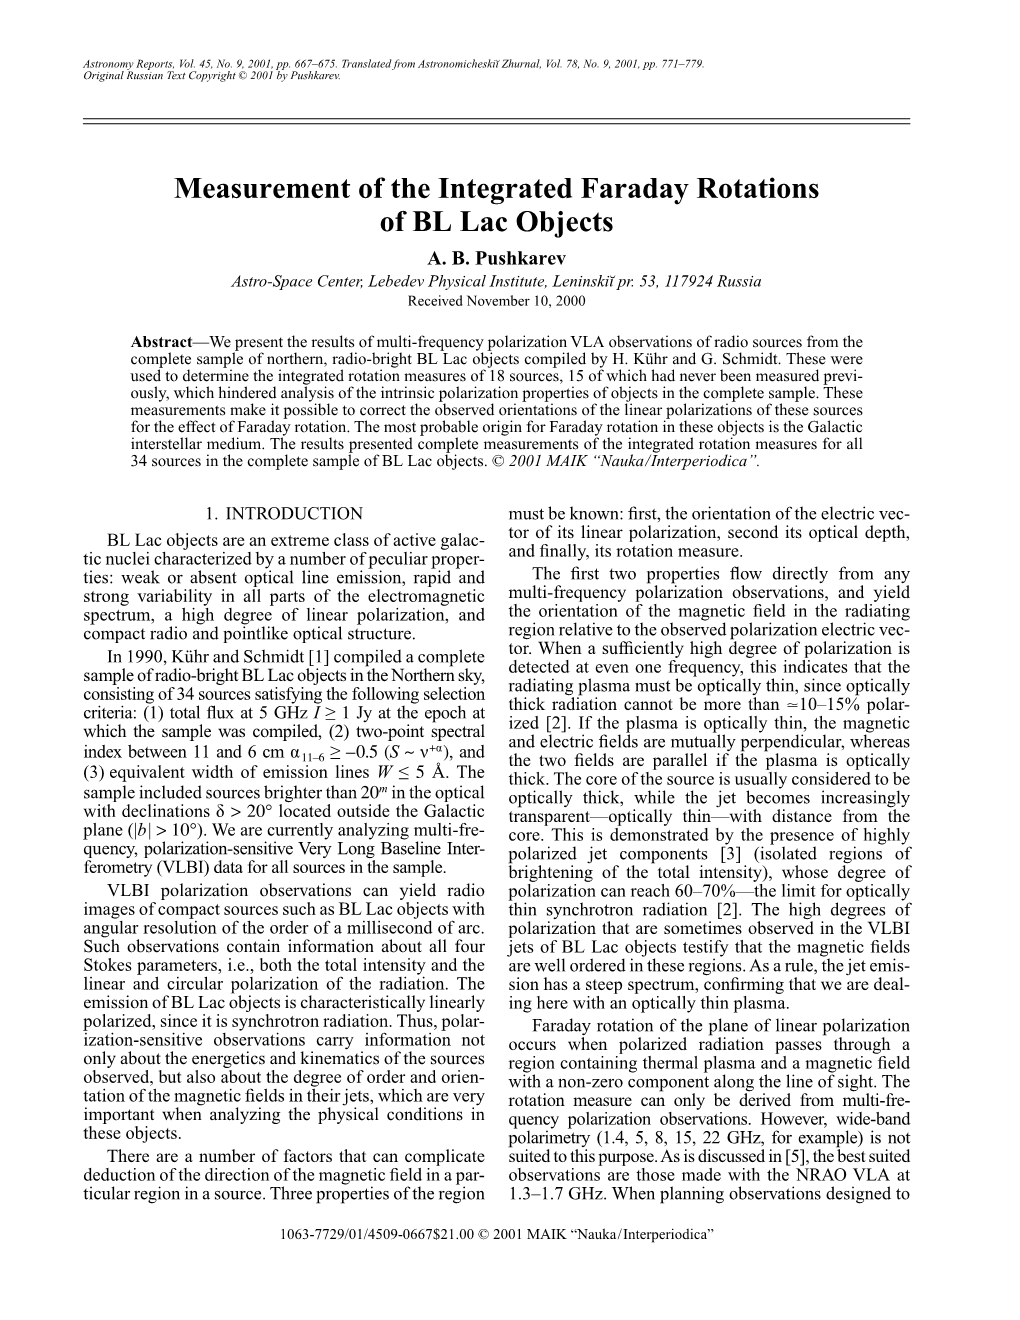 Measurement of the Integrated Faraday Rotations of BL Lac Objects A